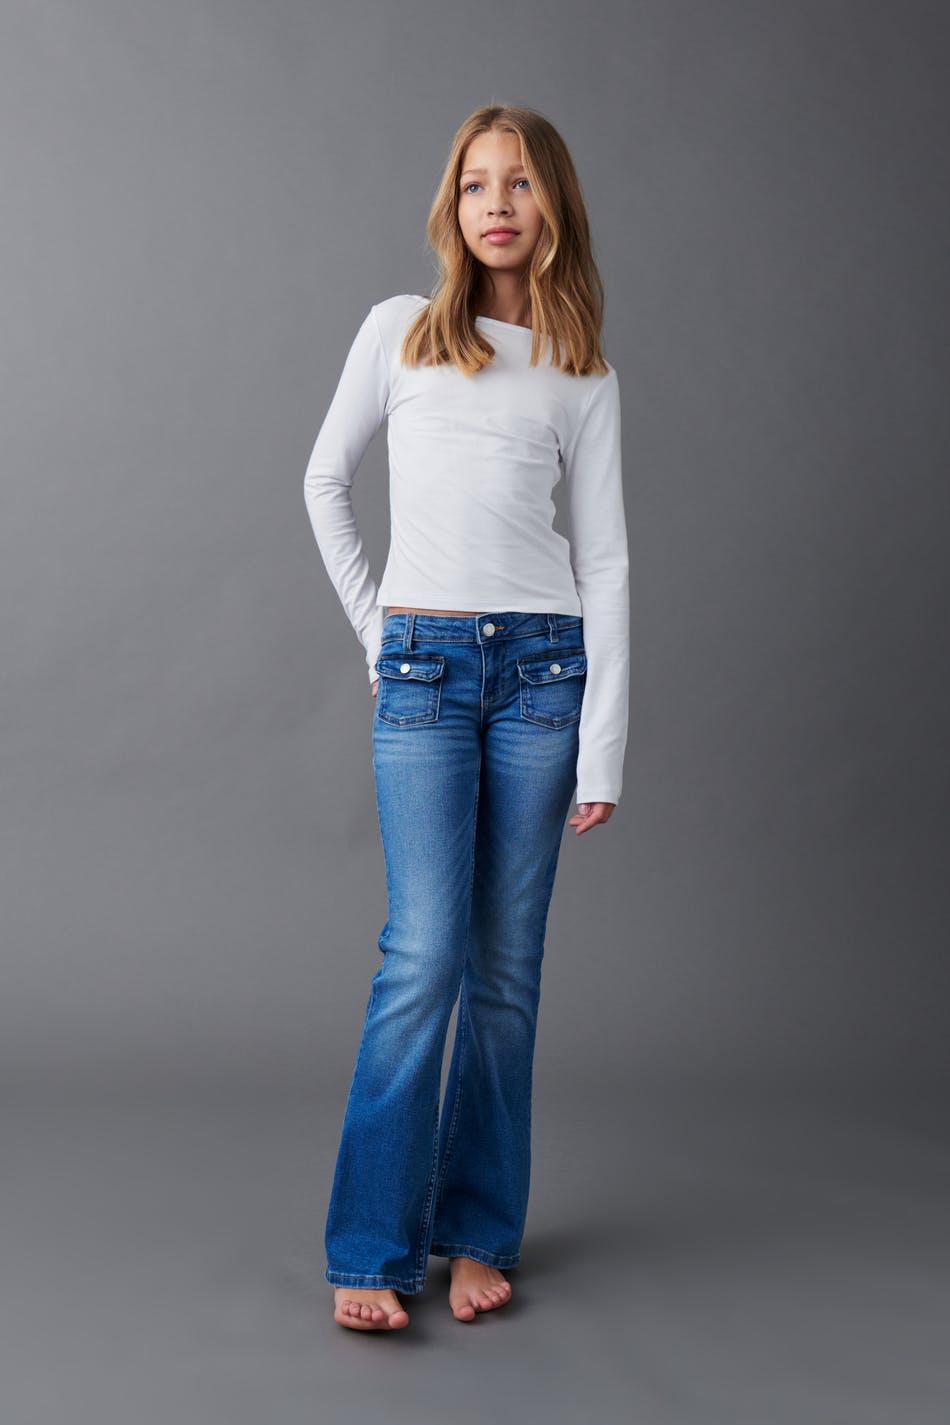 Gina Tricot - Front pocket bootcut jeans - wide jeans - Blue - 170 - Female